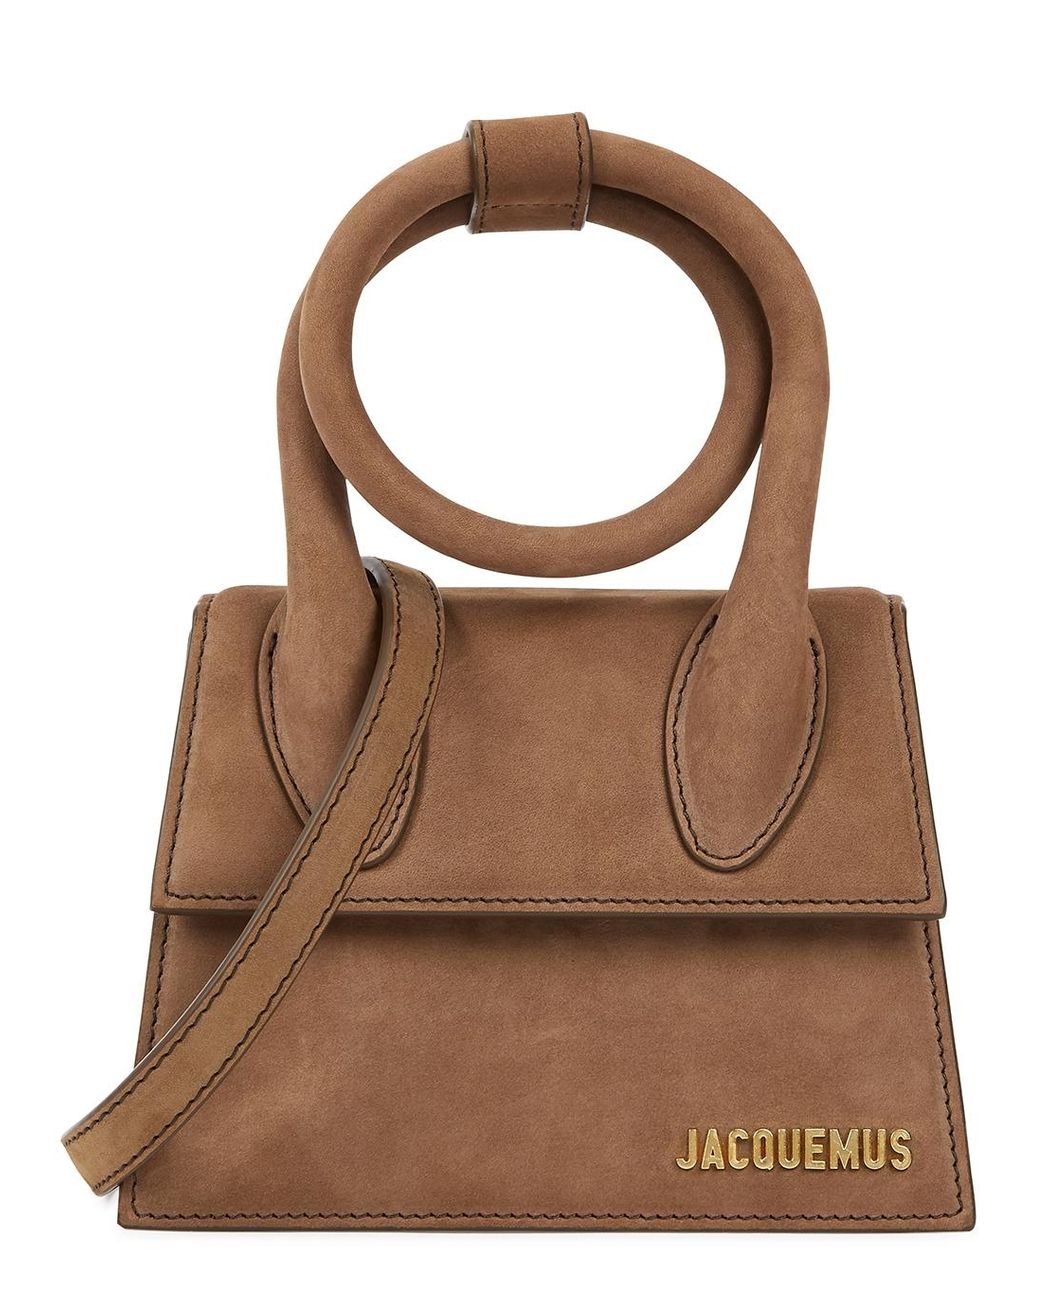 Jacquemus Le Chiquito Noued Suede Top Handle Bag in Brown | Lyst